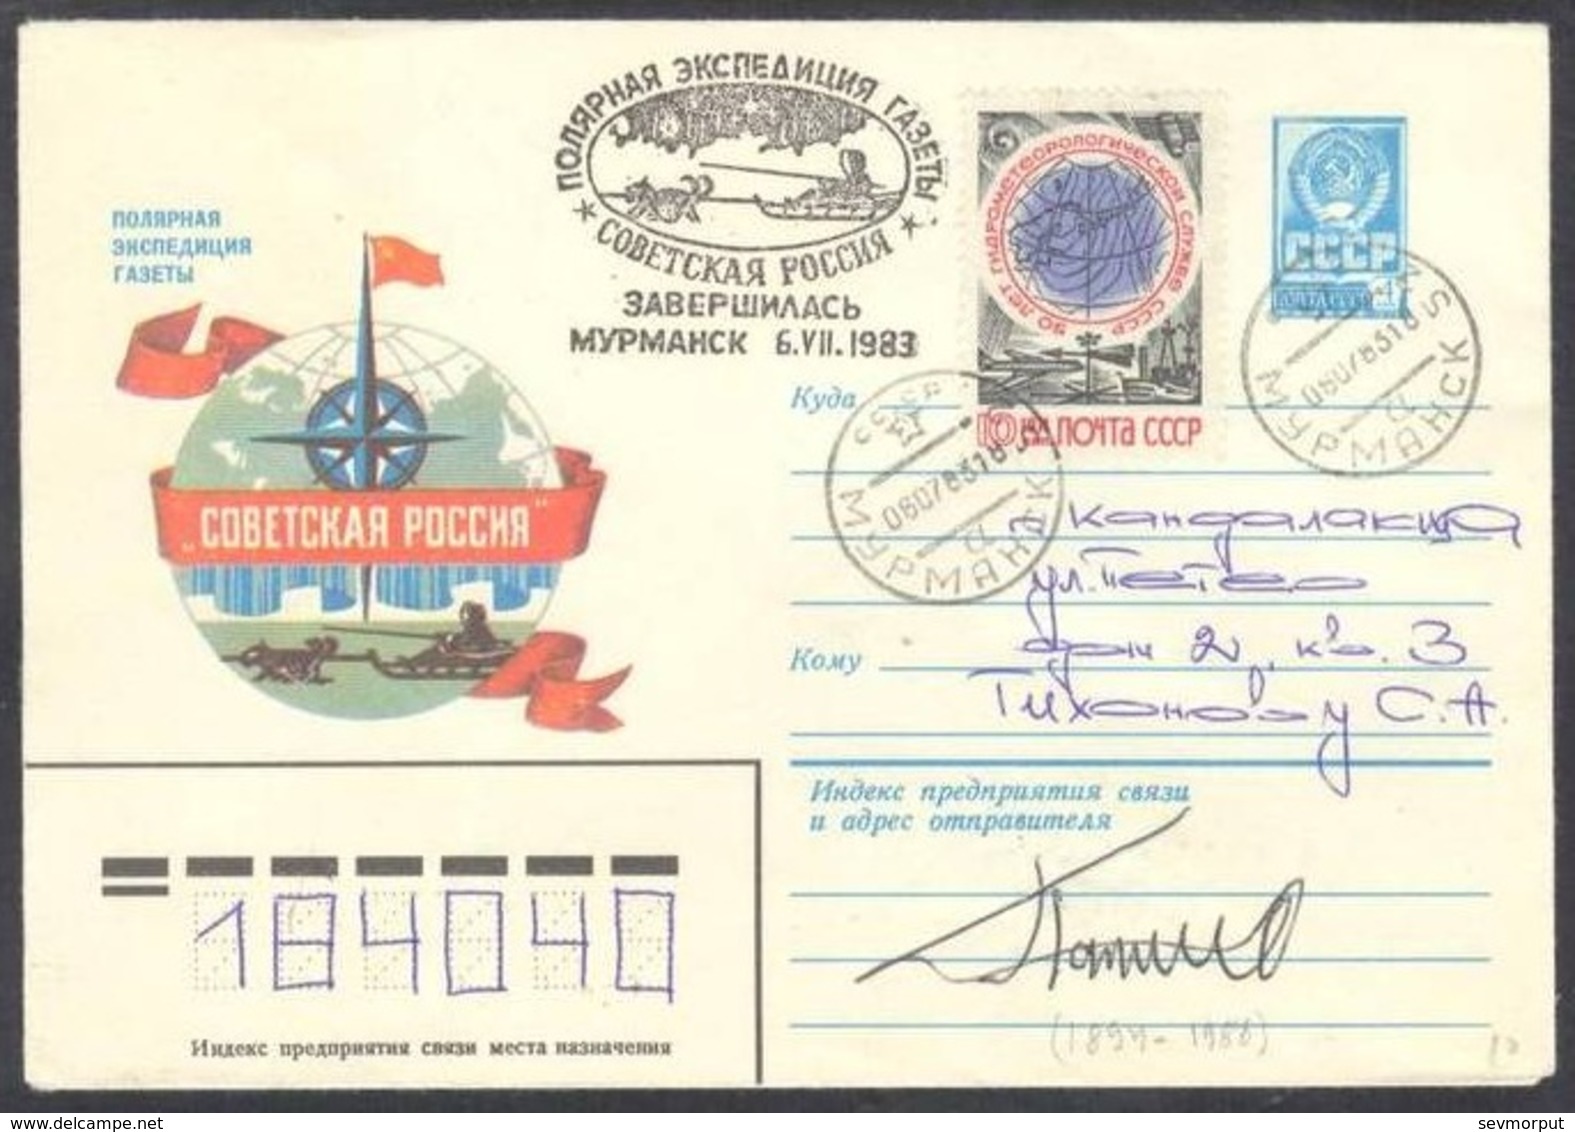 15999 RUSSIA 1982 ENTIER COVER Used NEWSPAPER ARCTIC EXPEDITION DOG CHIEN HUND Papanin Signed Signature USSR Mailed 520 - Arctic Expeditions